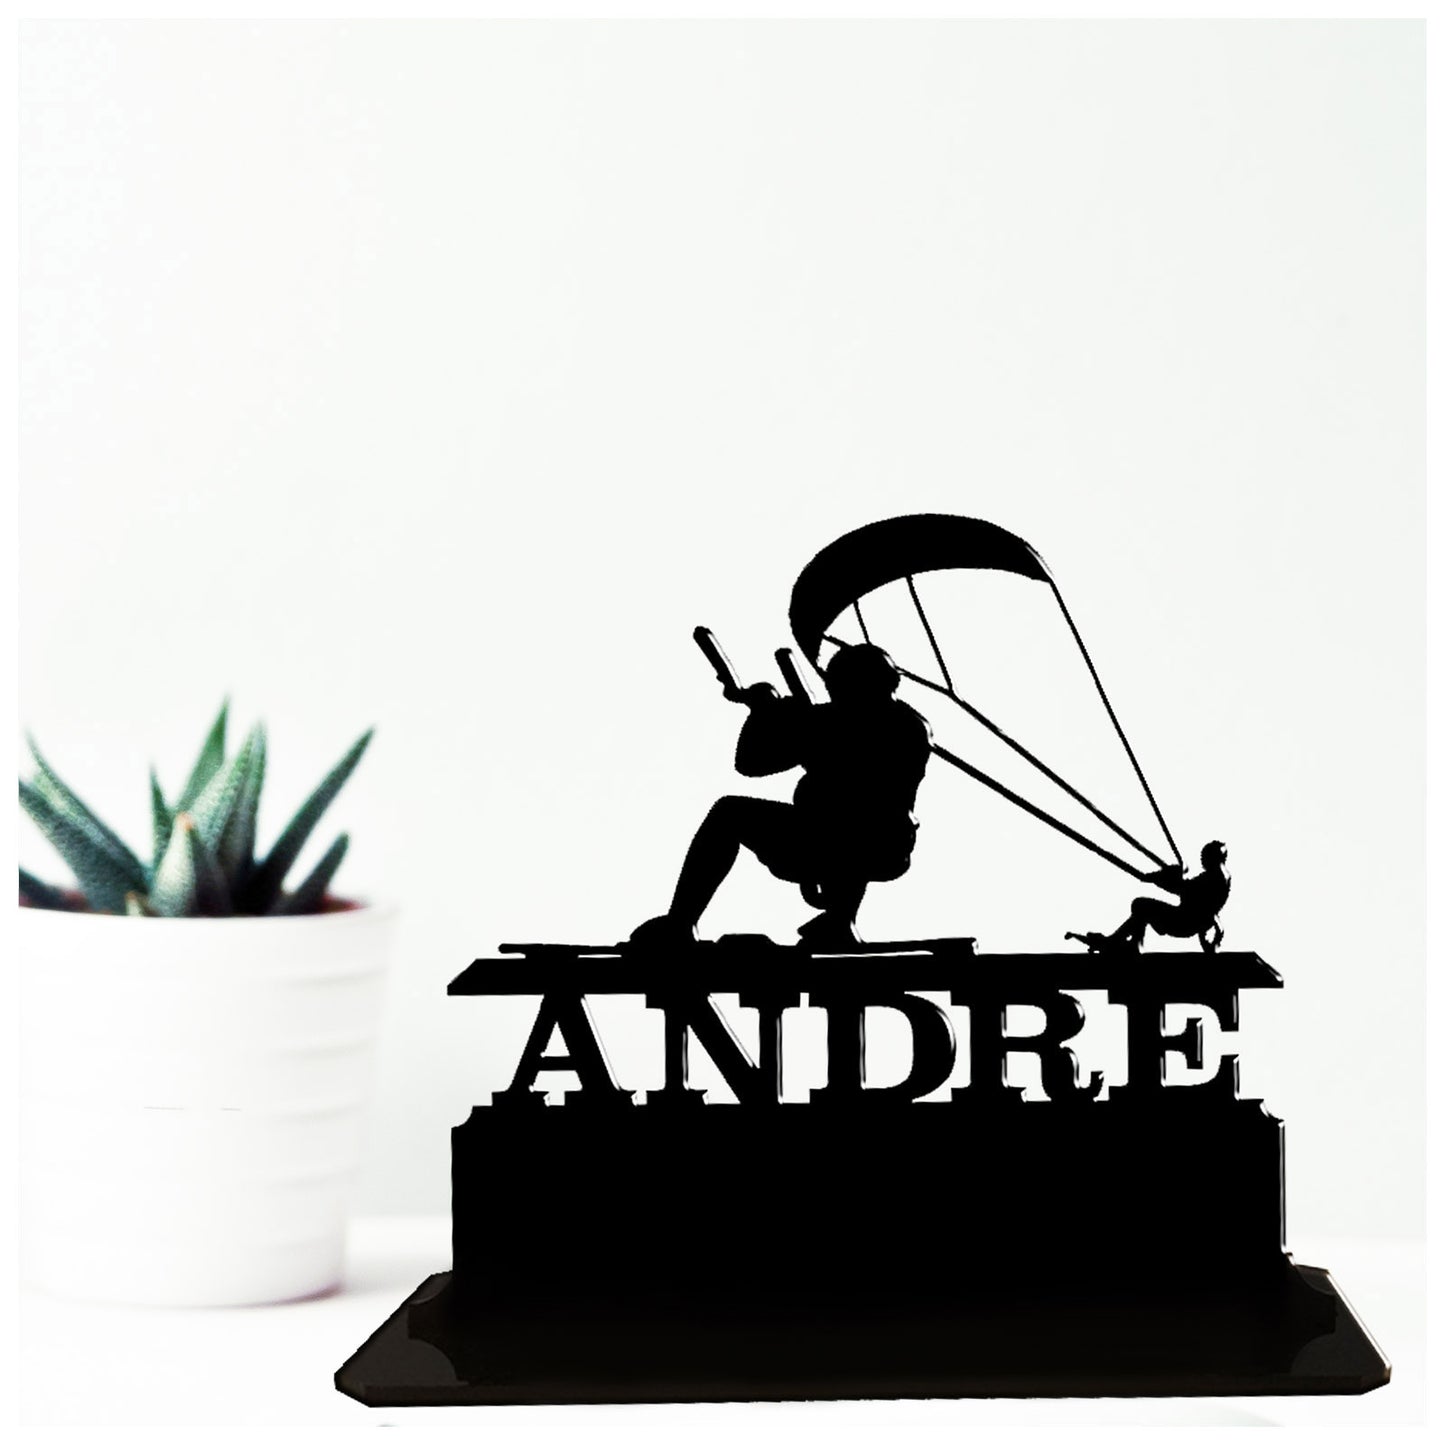 Personalised unique acrylic kitesurfing gift ideas. This standalone present is a keepsake ornament plaque.